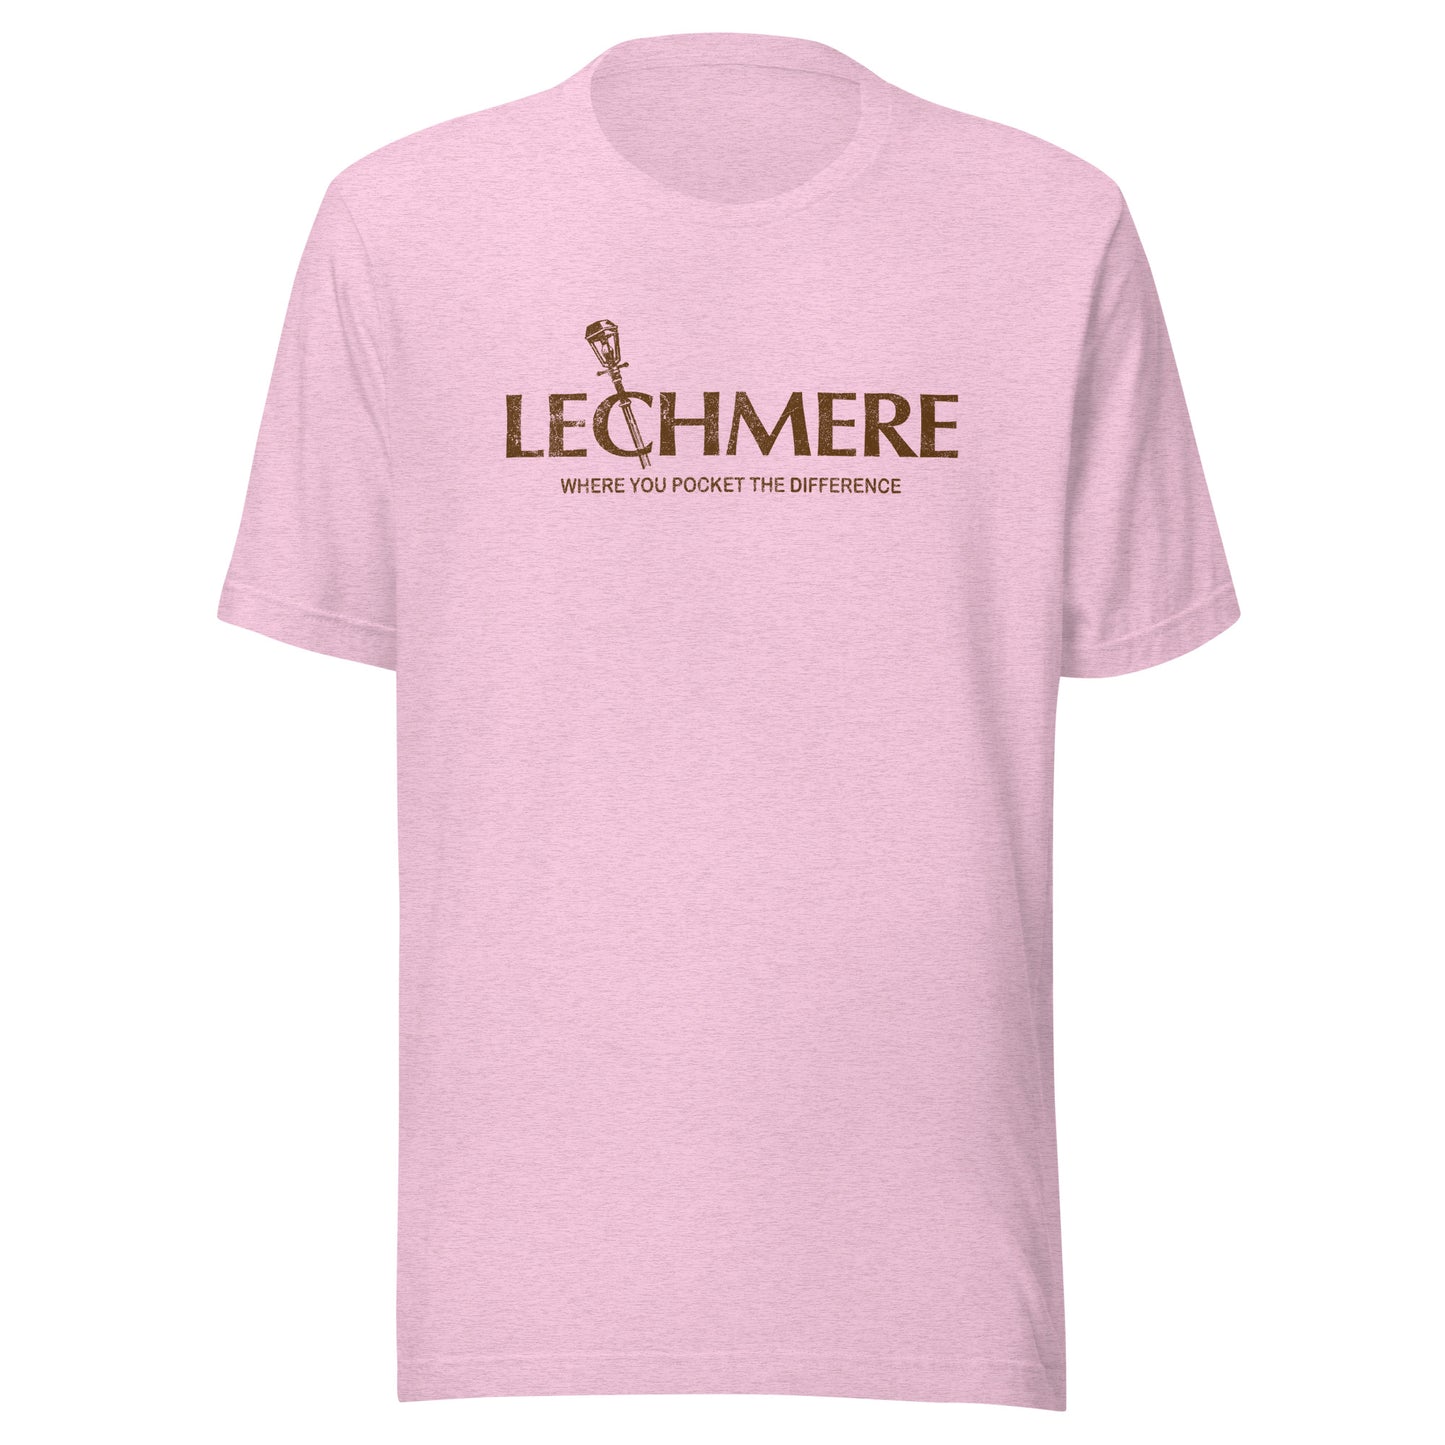 Lechmere Retro 1980s T-Shirt - Vintage Mens & Womens Old School Tee